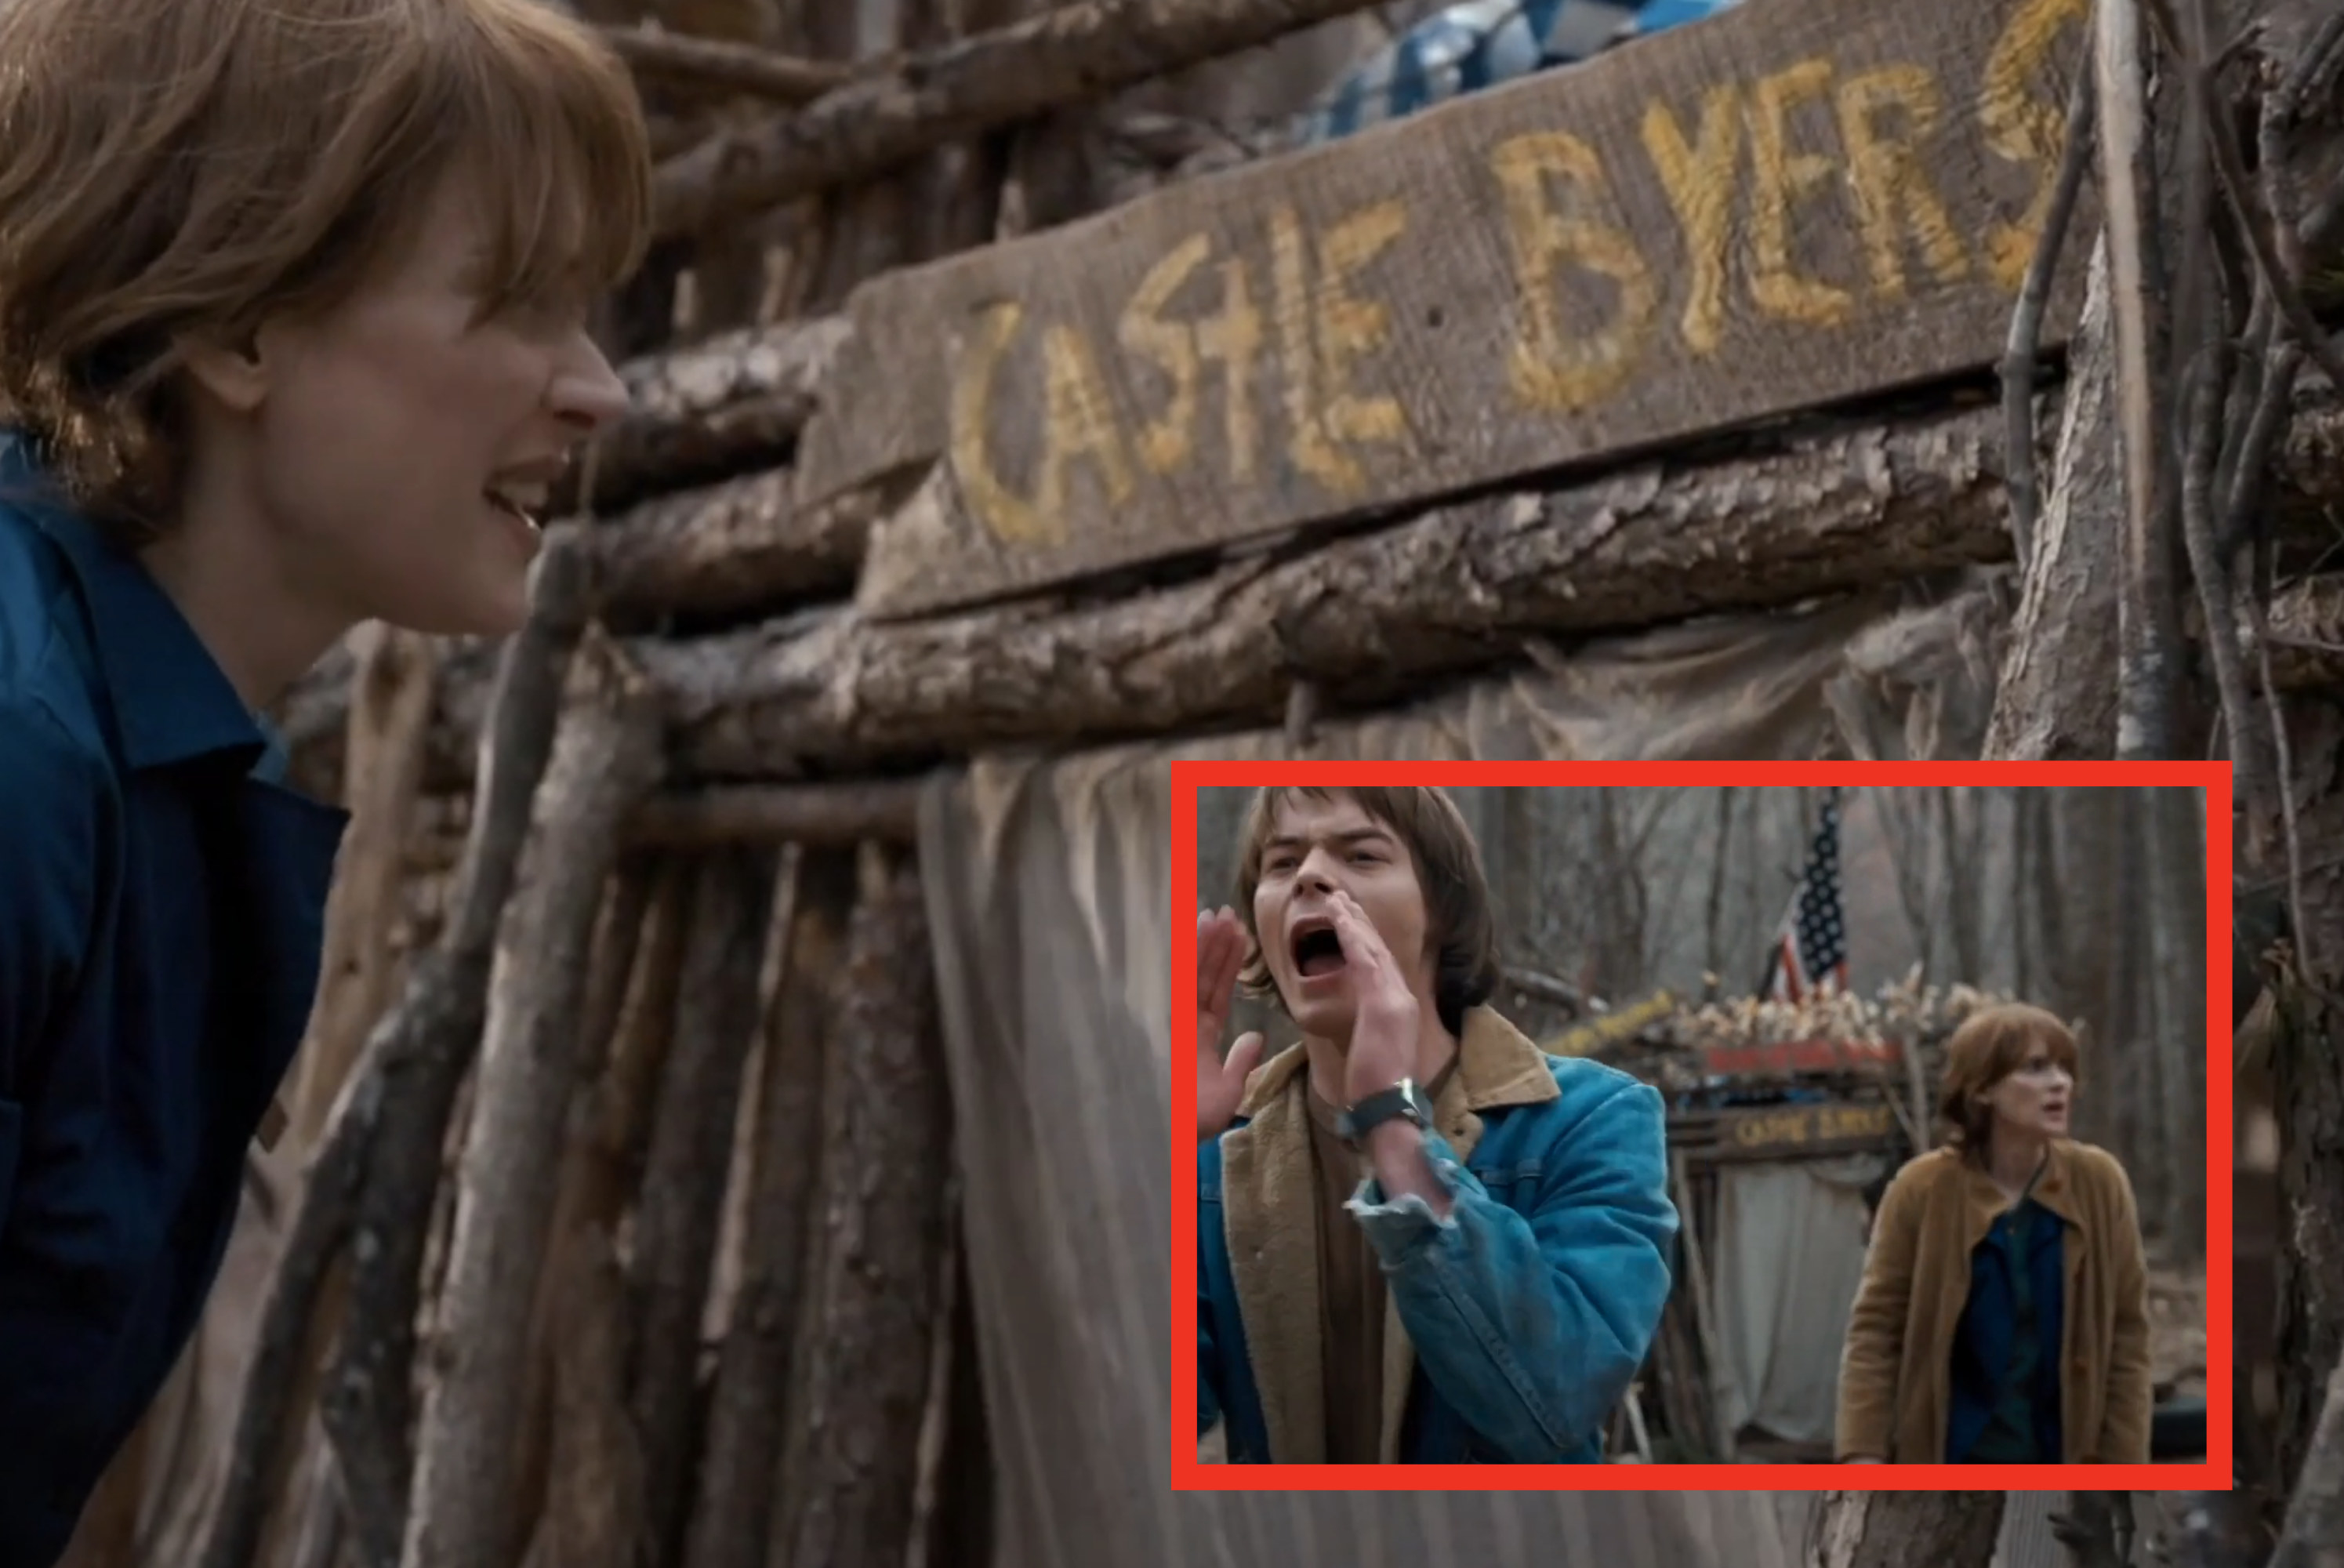 Castle Byers in &quot;Stranger Things&quot;